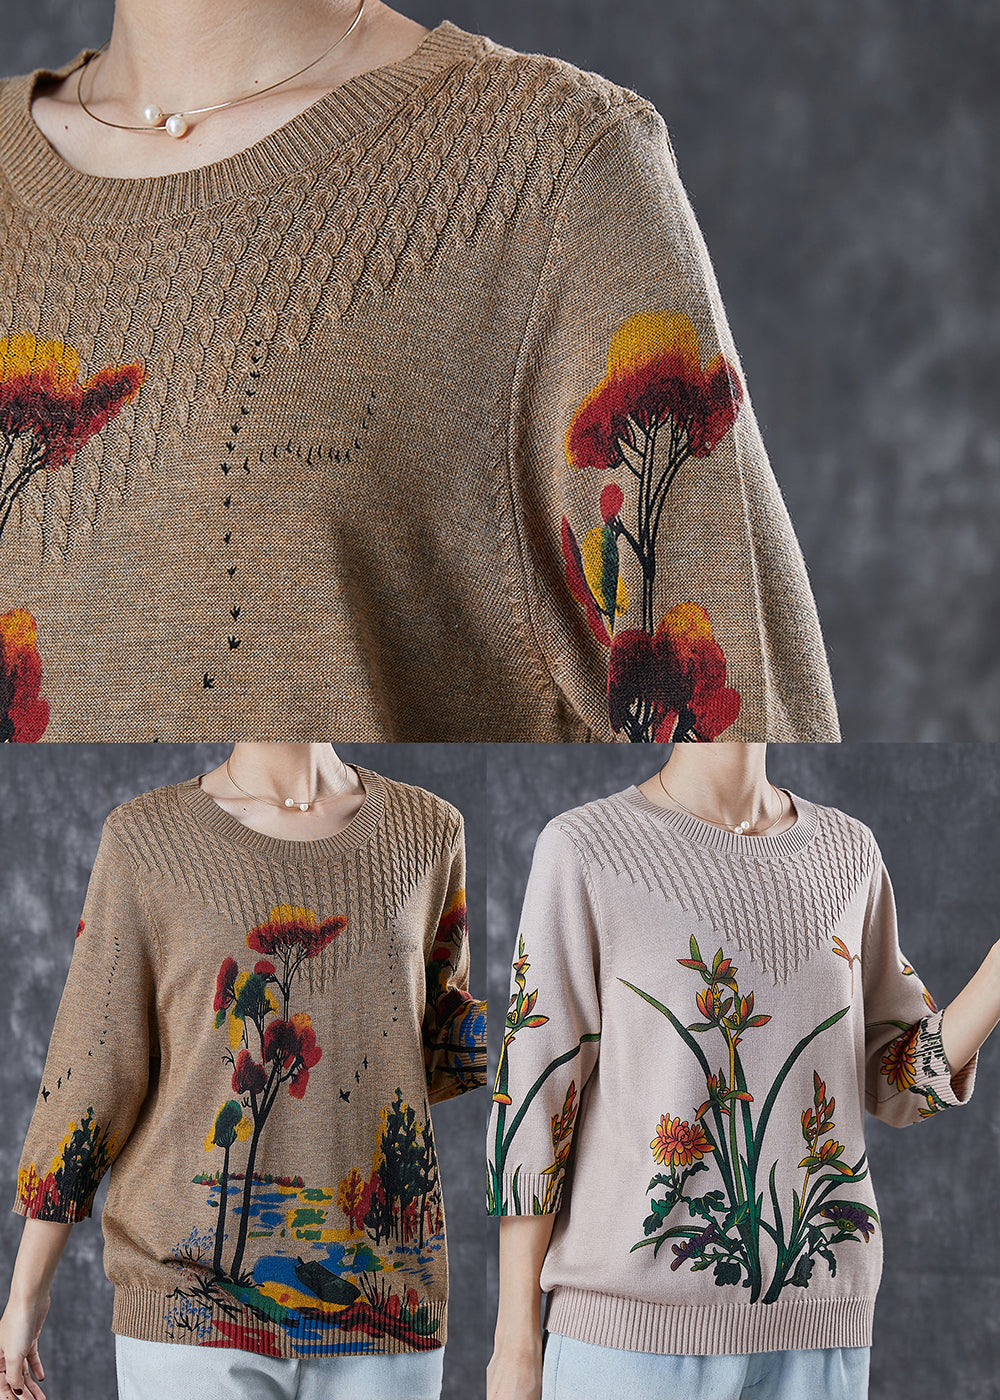 Coffee Print Knit Sweater Tops Oversized Spring